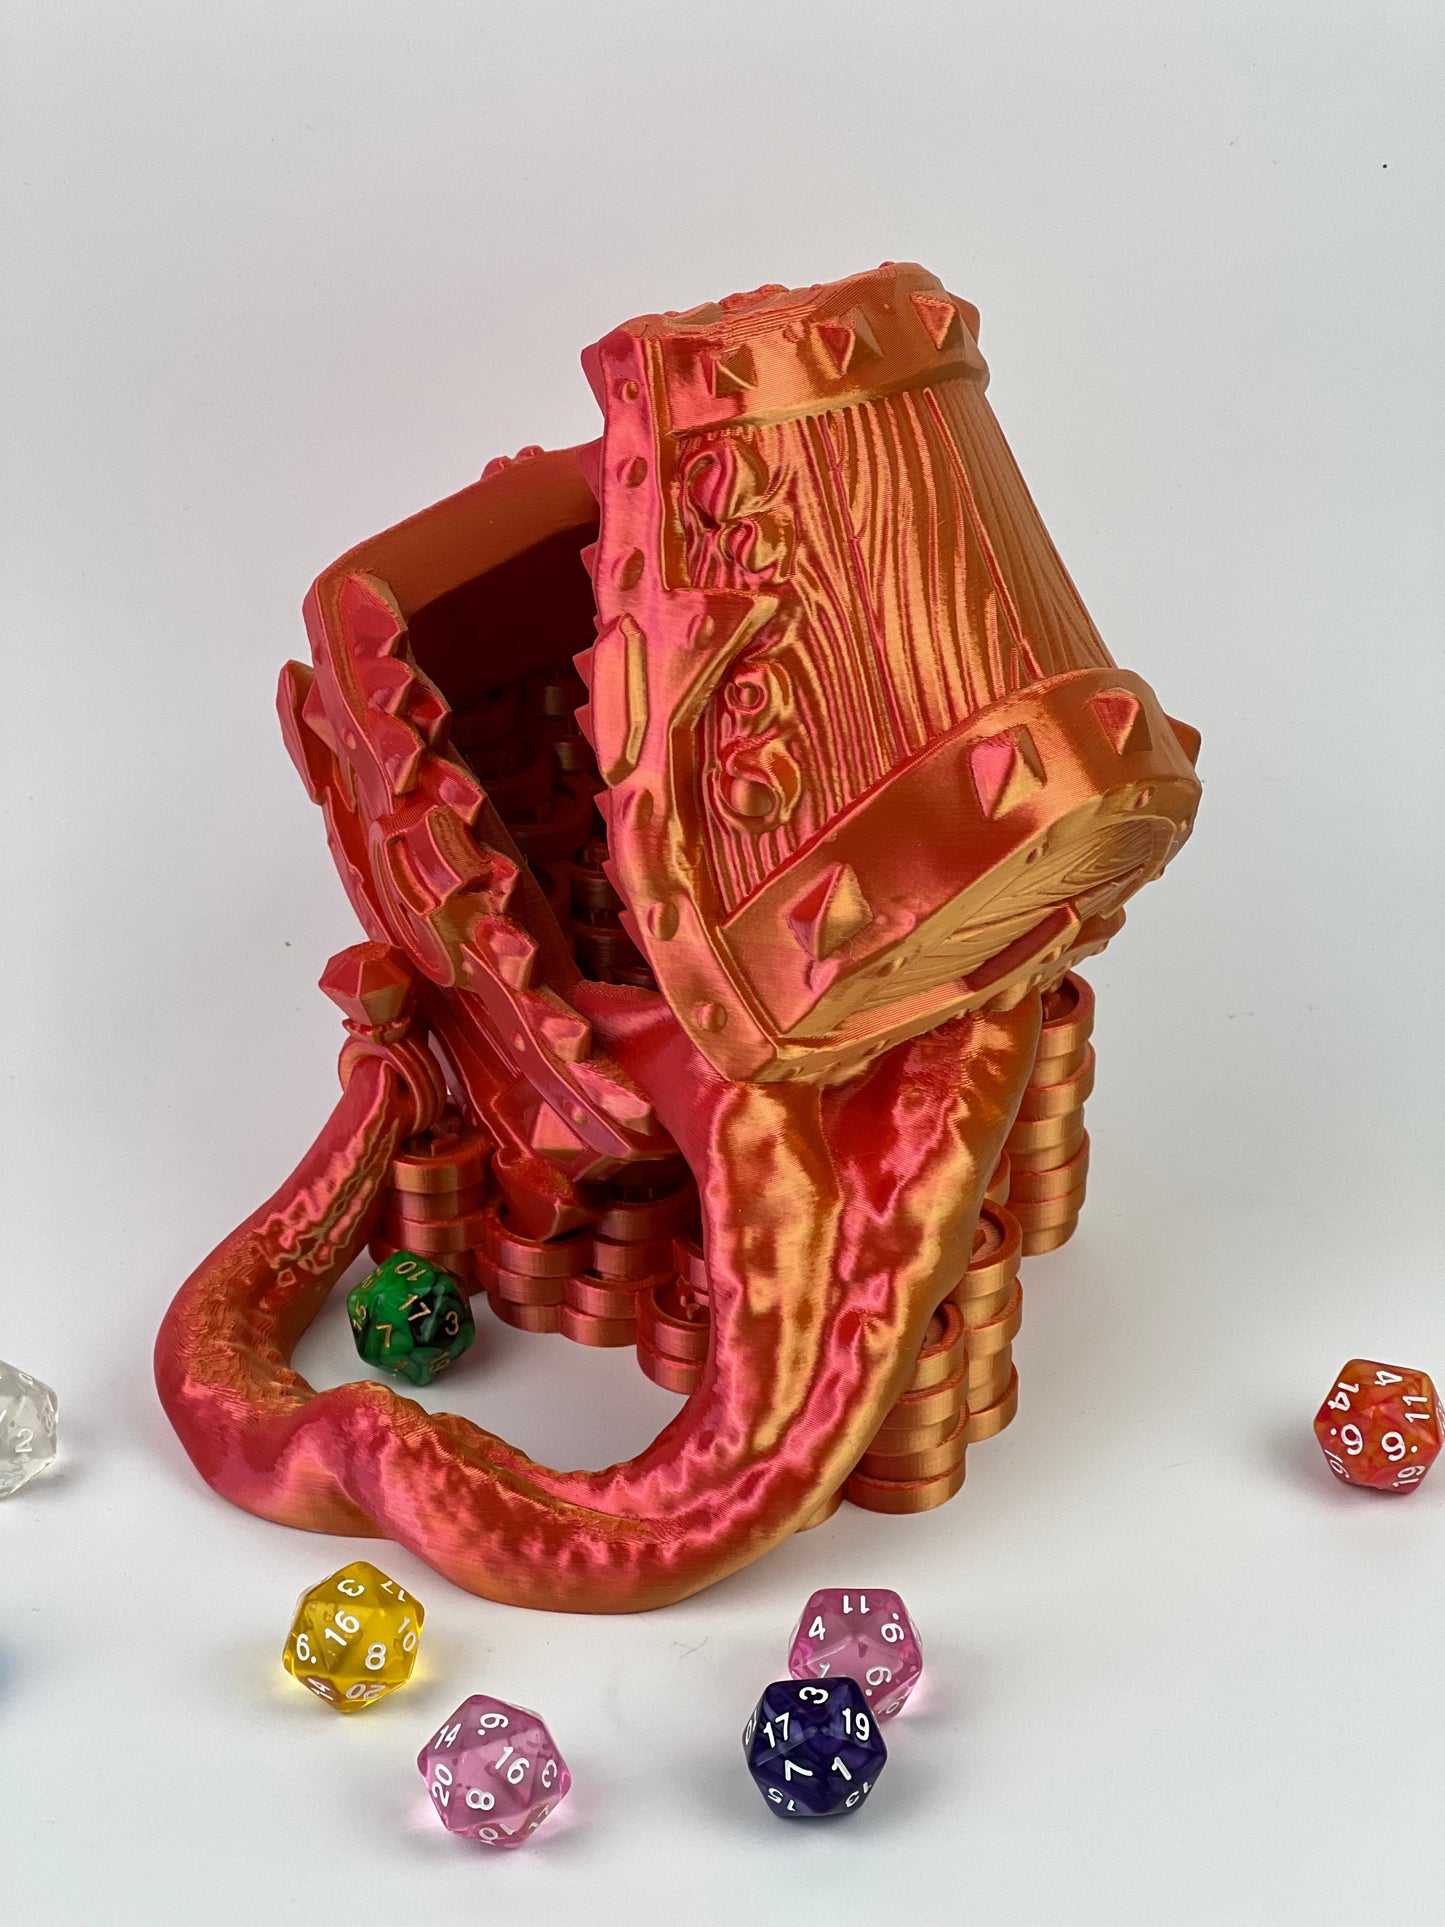 Spell Books Dice Tower Dual Extrusion Silk